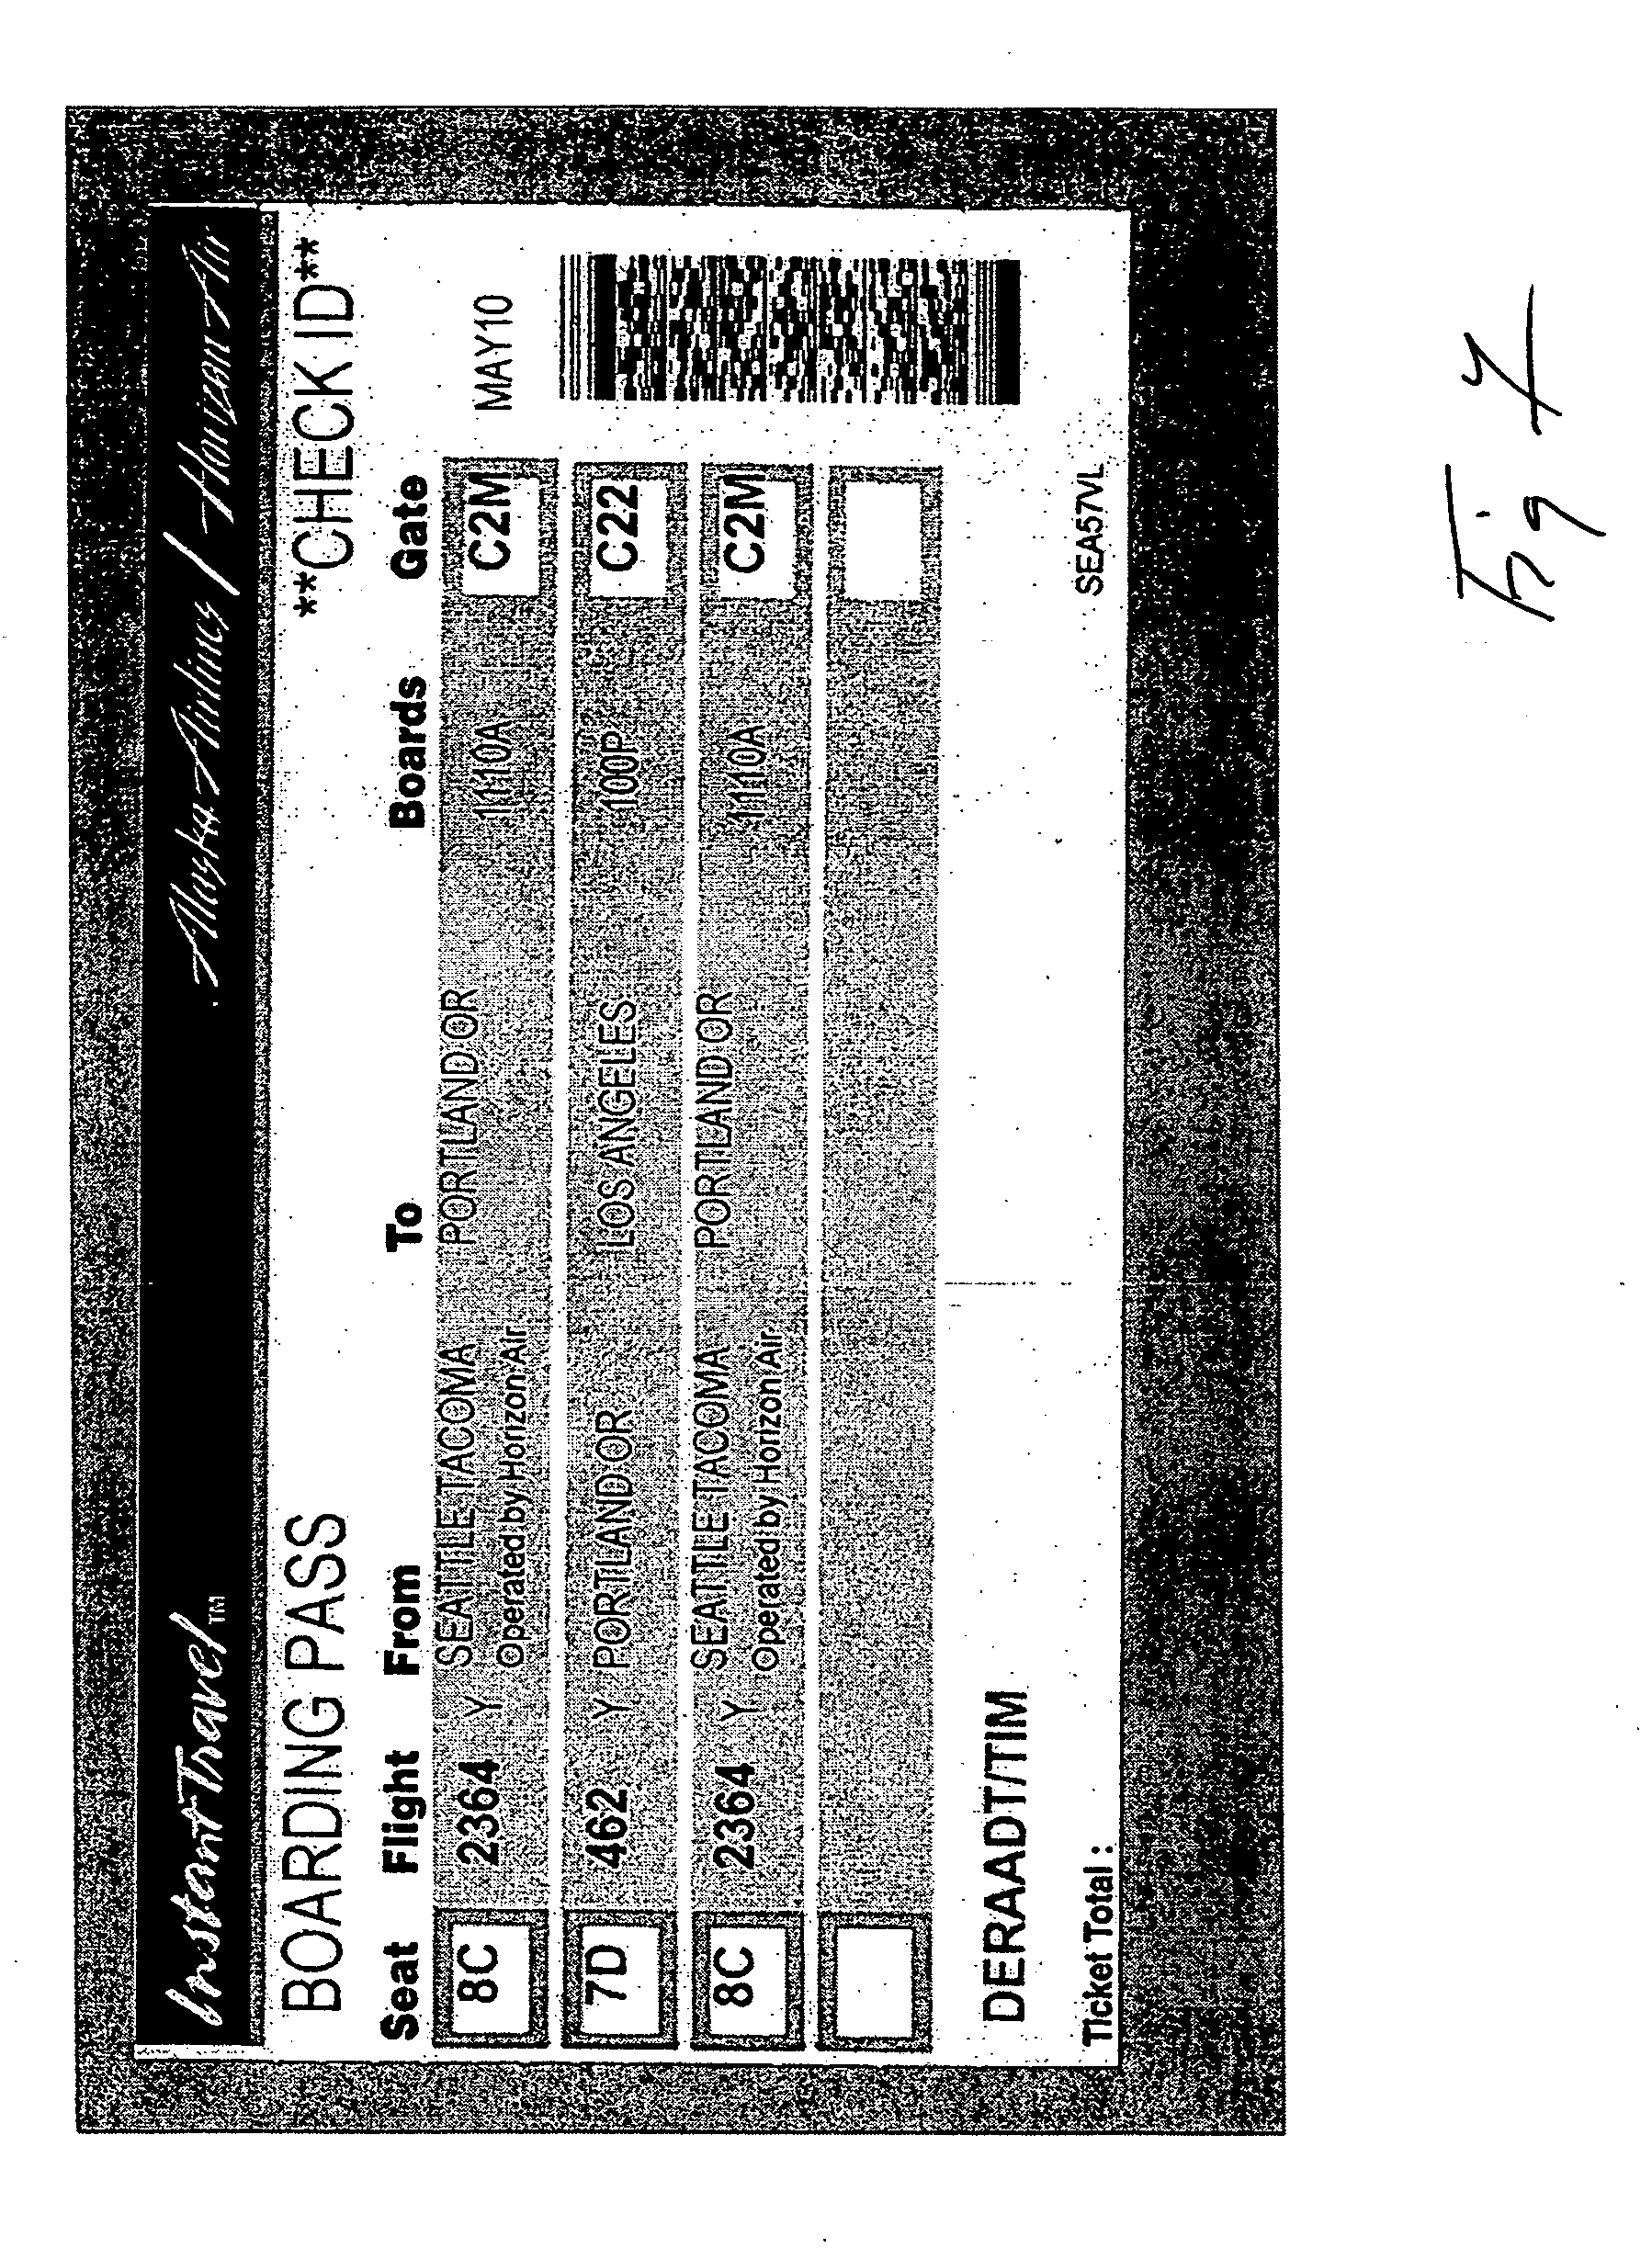 Method of selecting and storing airline ticket data